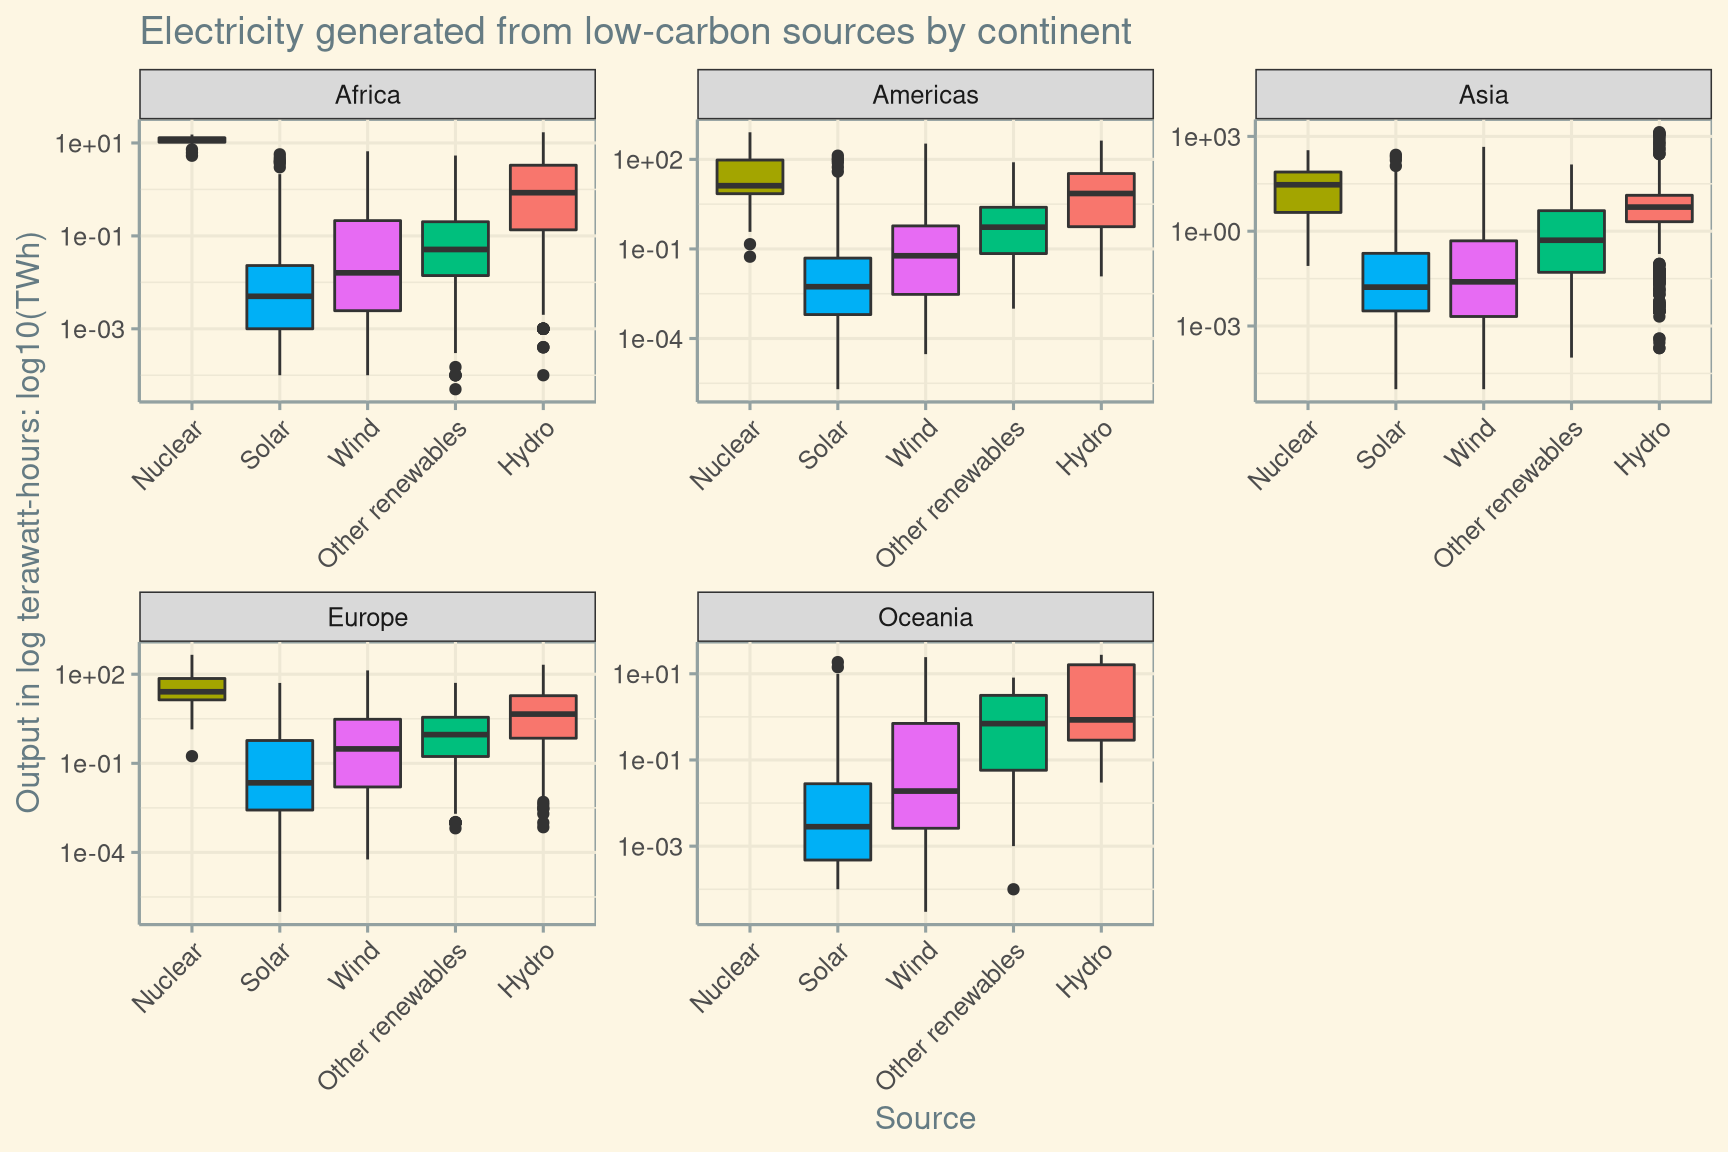 Box plots of electricity produced from low-carbon energy sources, faceted by continent.